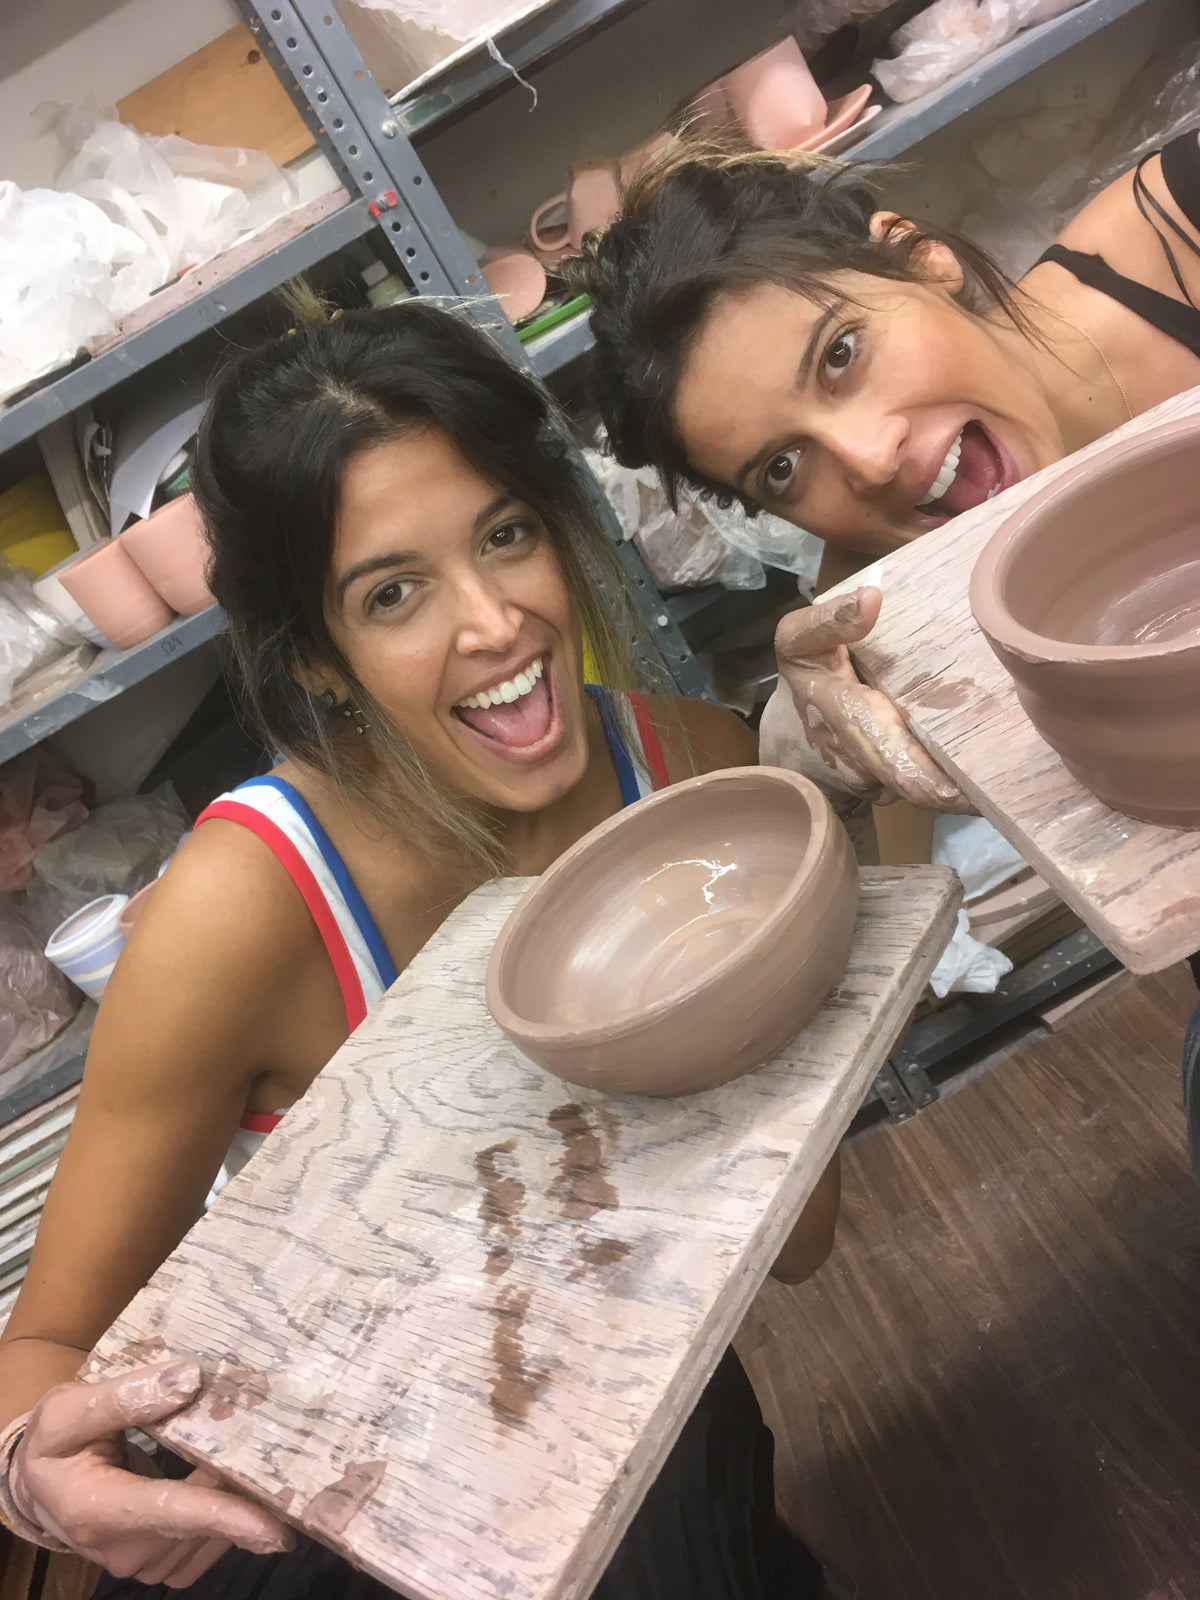 Try-it-Out/Private Lessons – BrickHouse Ceramic Art Center